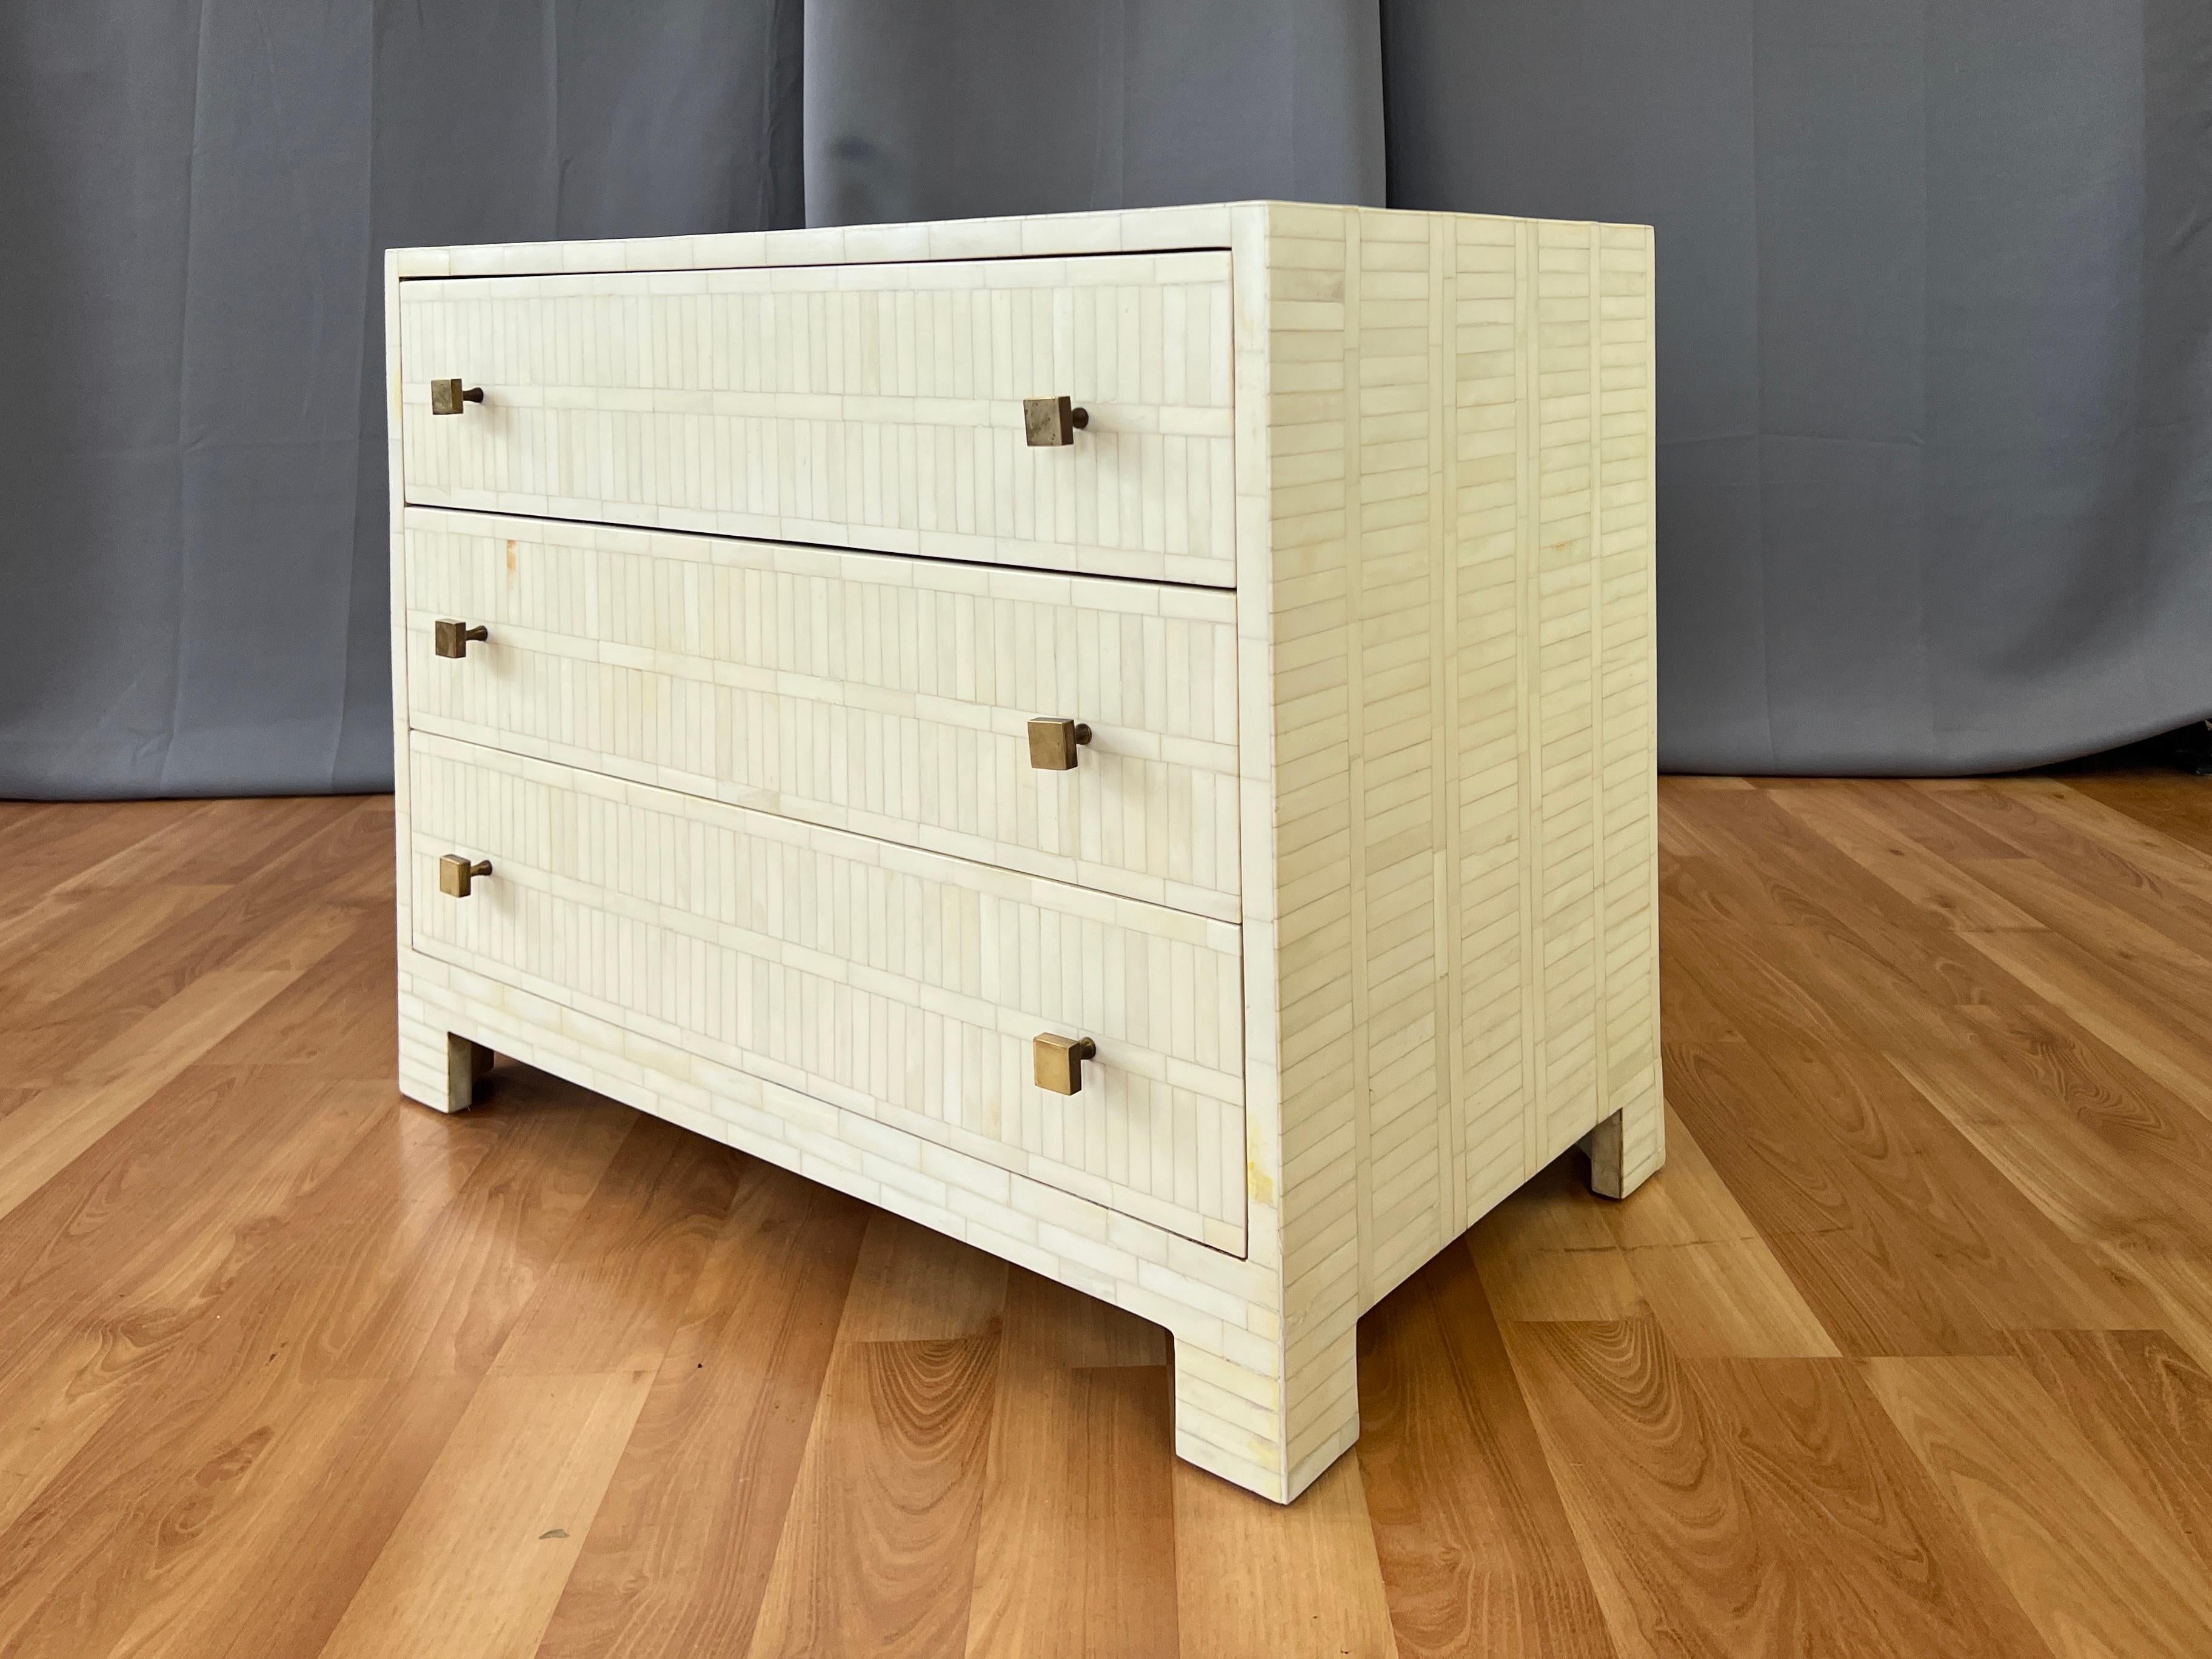 A super chic circa 1980 tessellated bone three-drawer dresser in the style of Enrique Garcel or Jimeco Itda.

Clean lines and perfect proportions, all clad head-to-toe in more than one thousand meticulously cut and placed off-white bone tiles.